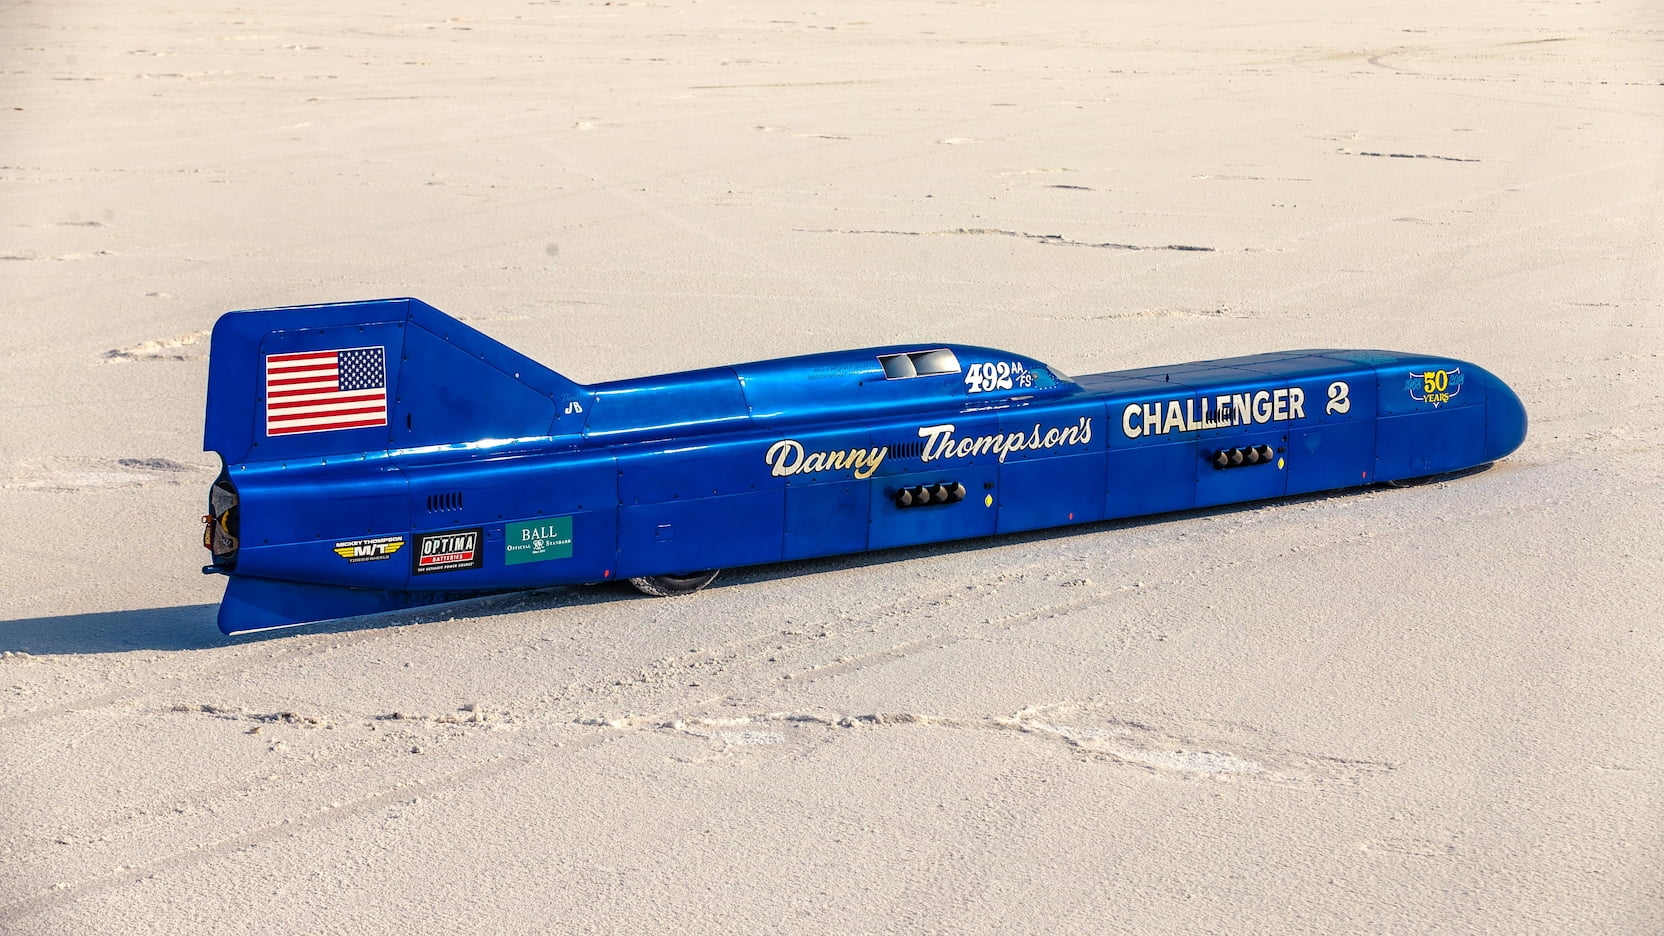 Challenger 2 speed record car